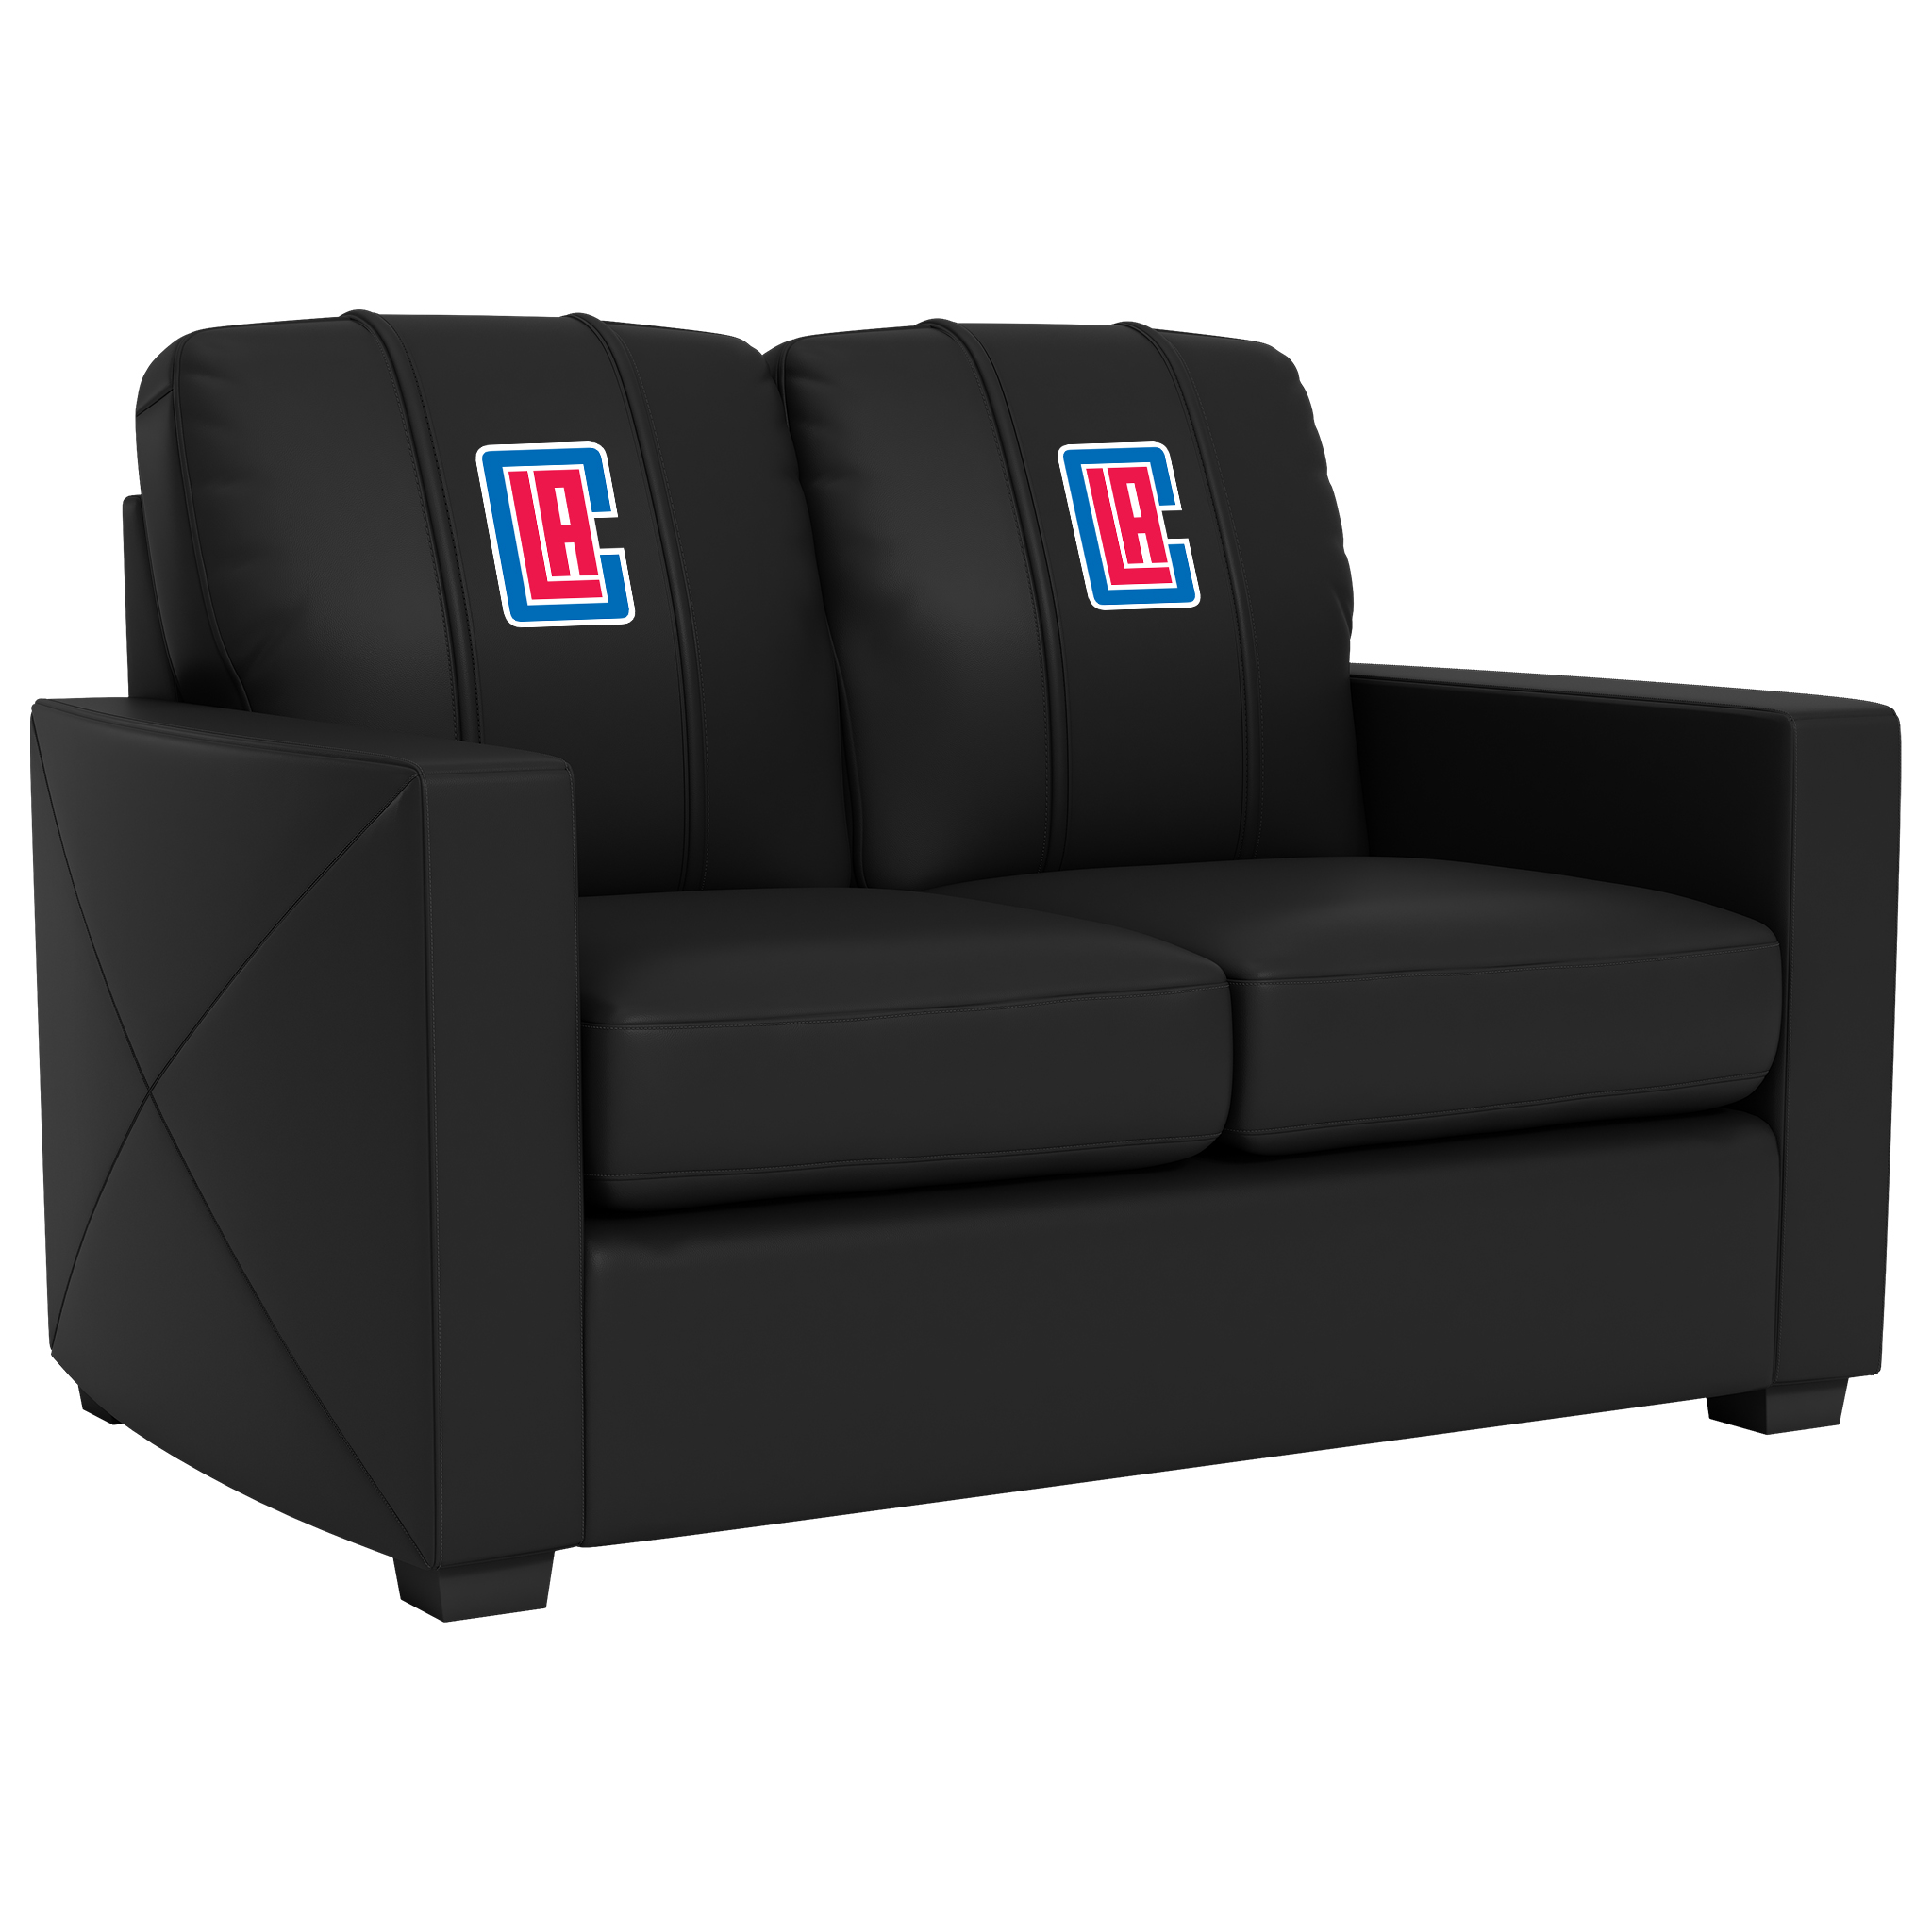 Los Angeles Clippers Silver Loveseat with Los Angeles Clippers Secondary